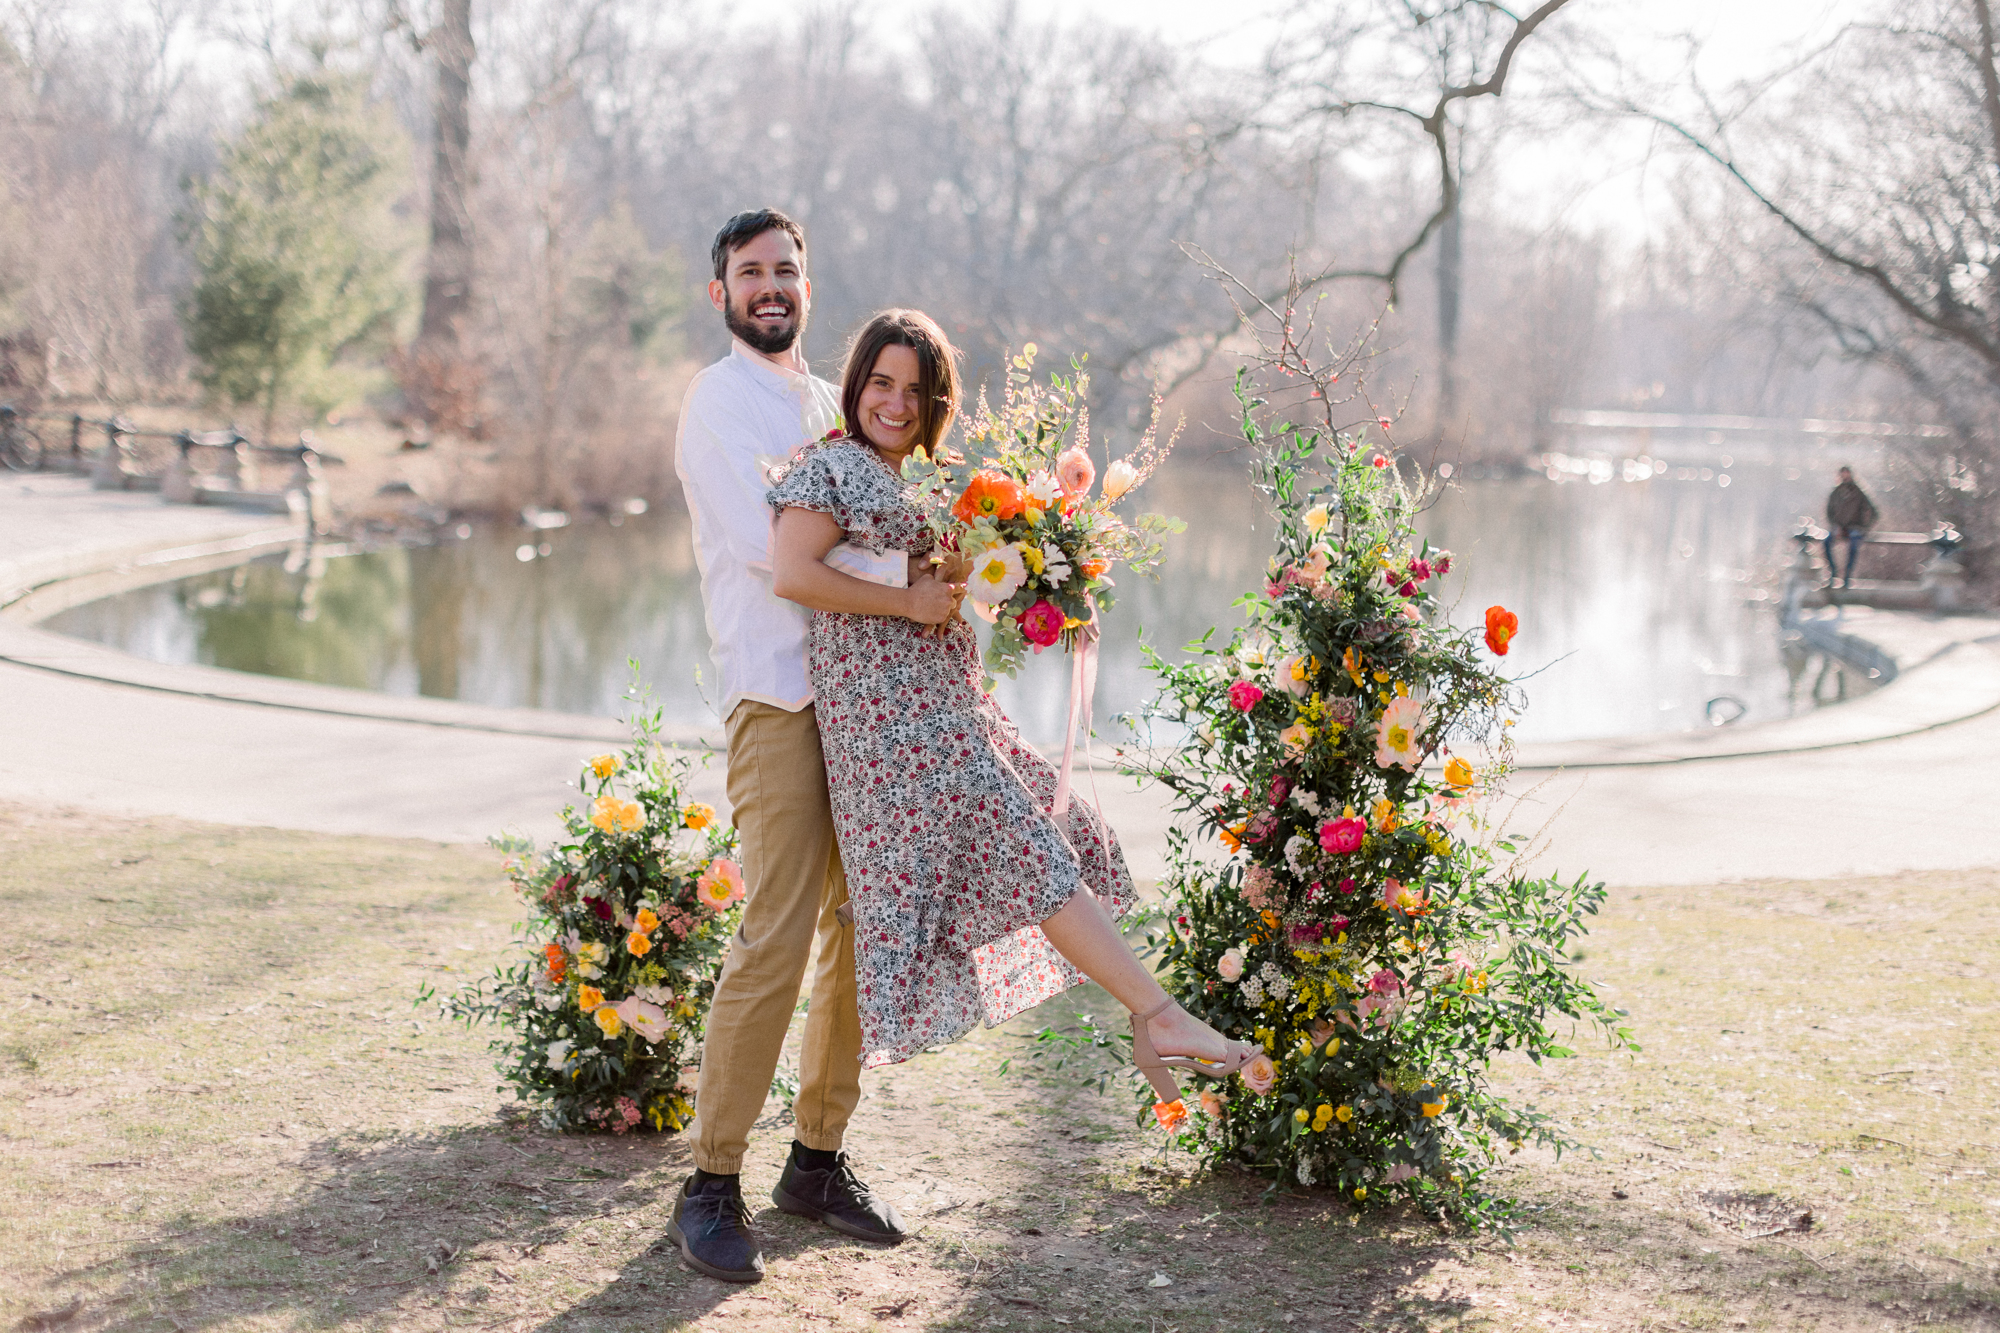 Beautiful Elopement Photography in NYC